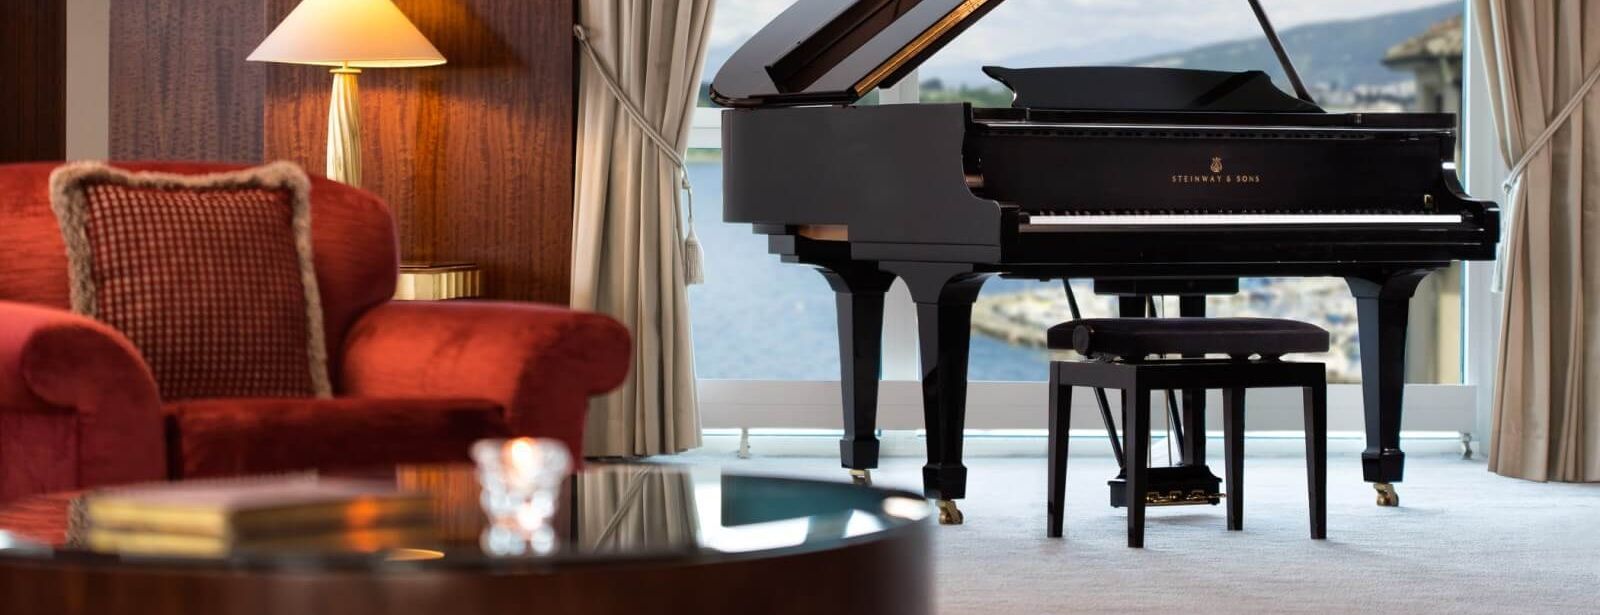 1600×900-Royal-Penthouse-Suite—Imperial-Steinway-Grand-Piano-Med